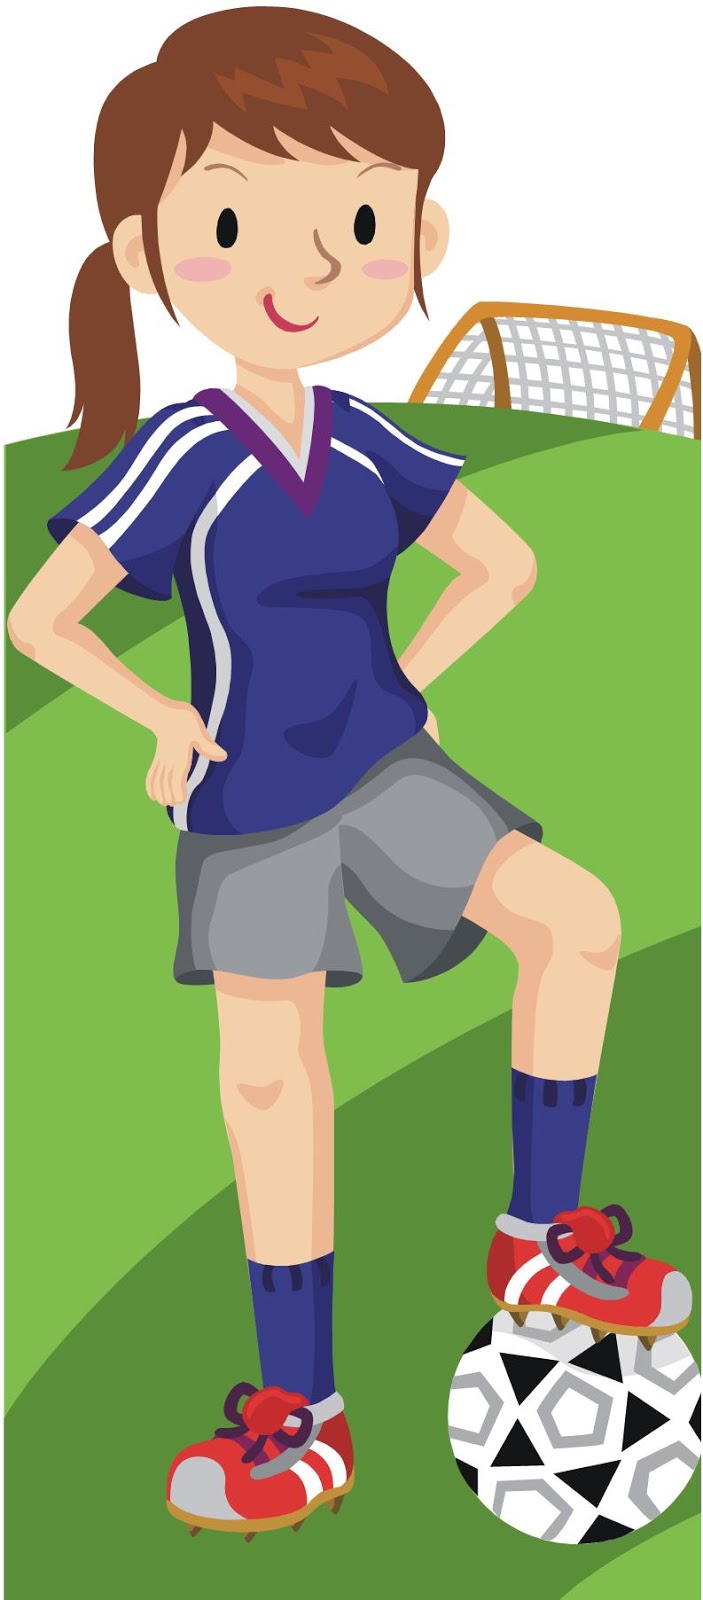 Playing clip art library. Play clipart girl soccer